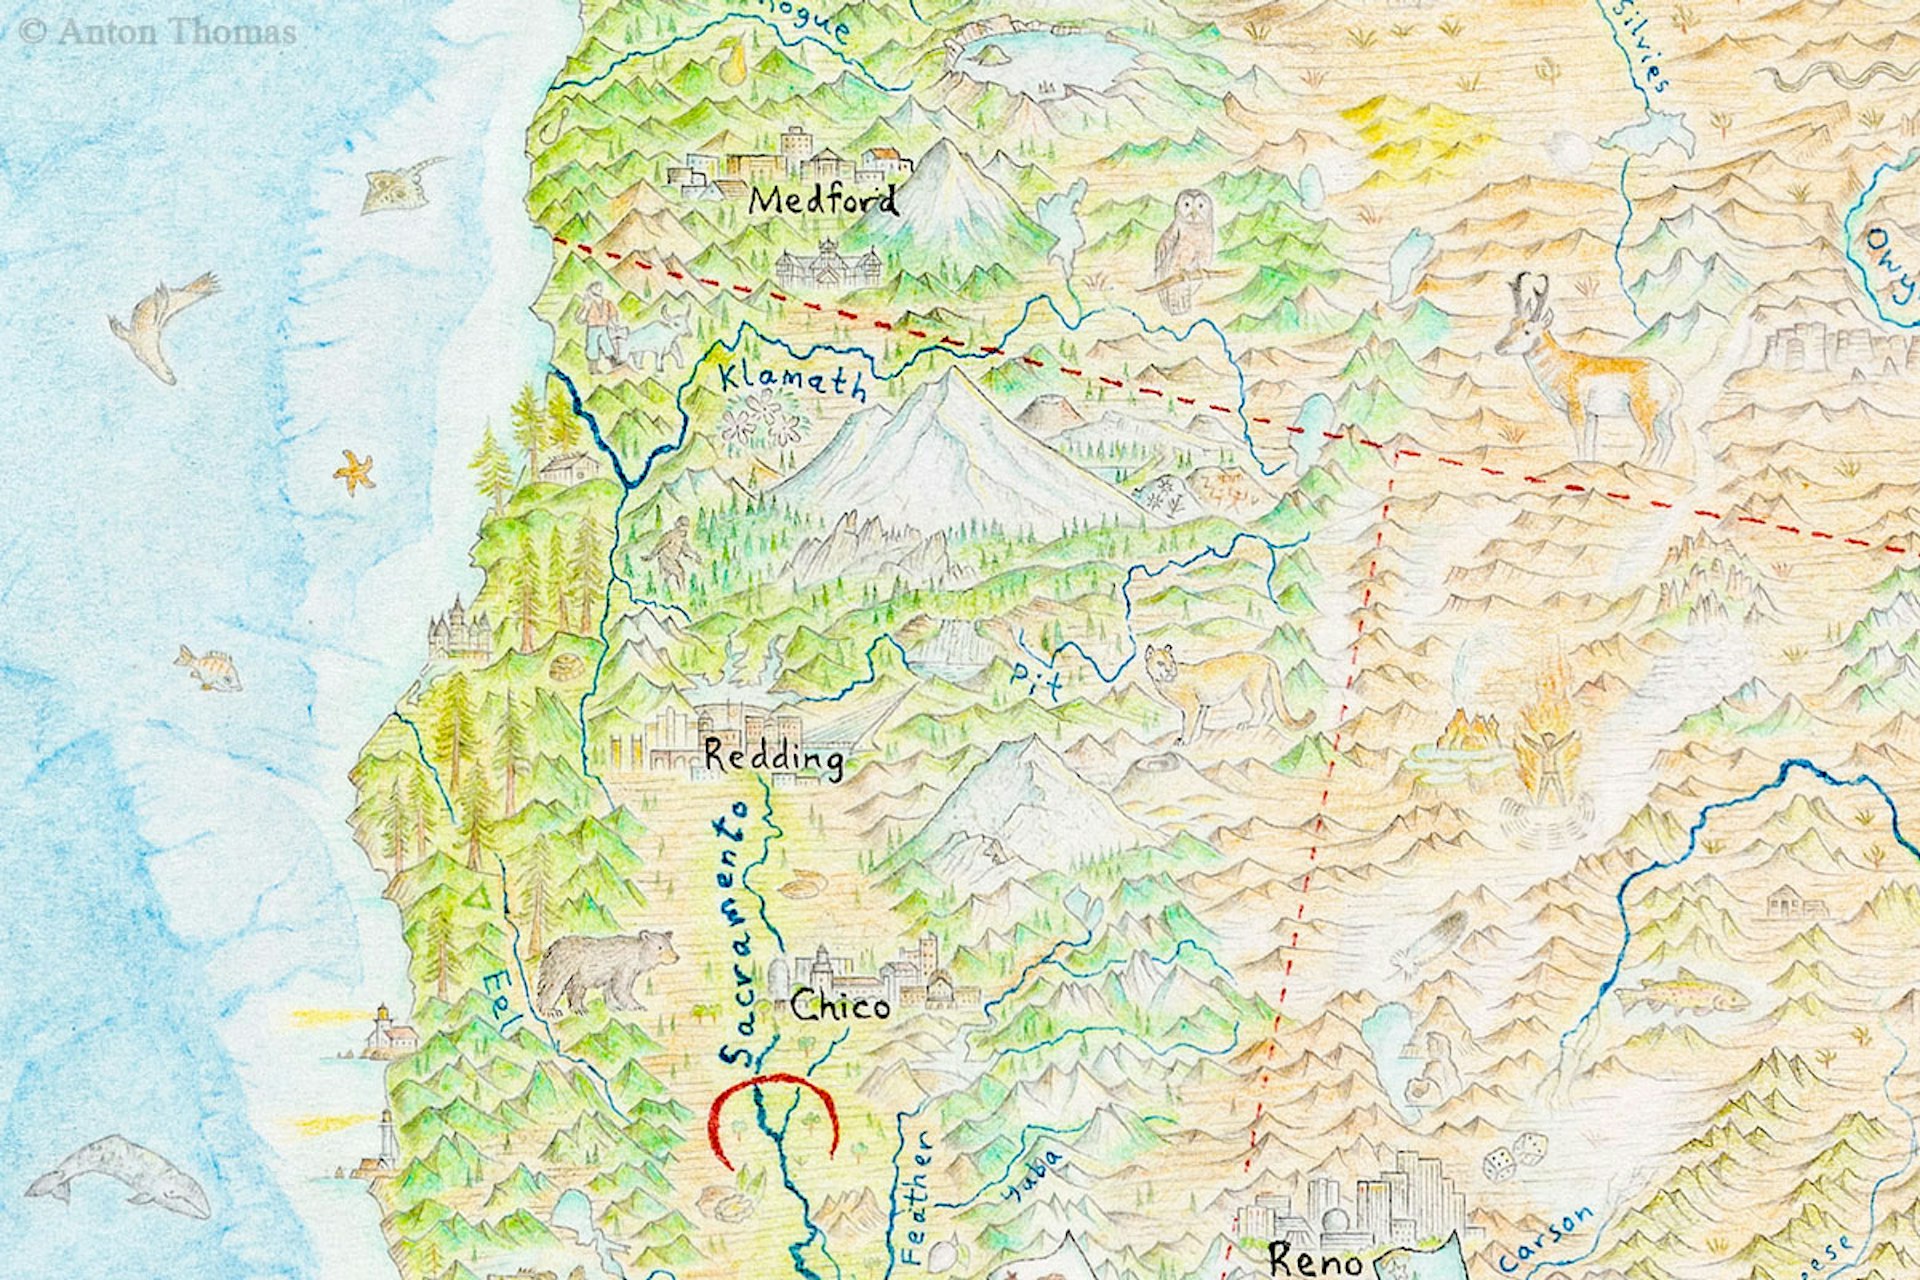 A detail of the map around California, where one can see a tiny sasquatch